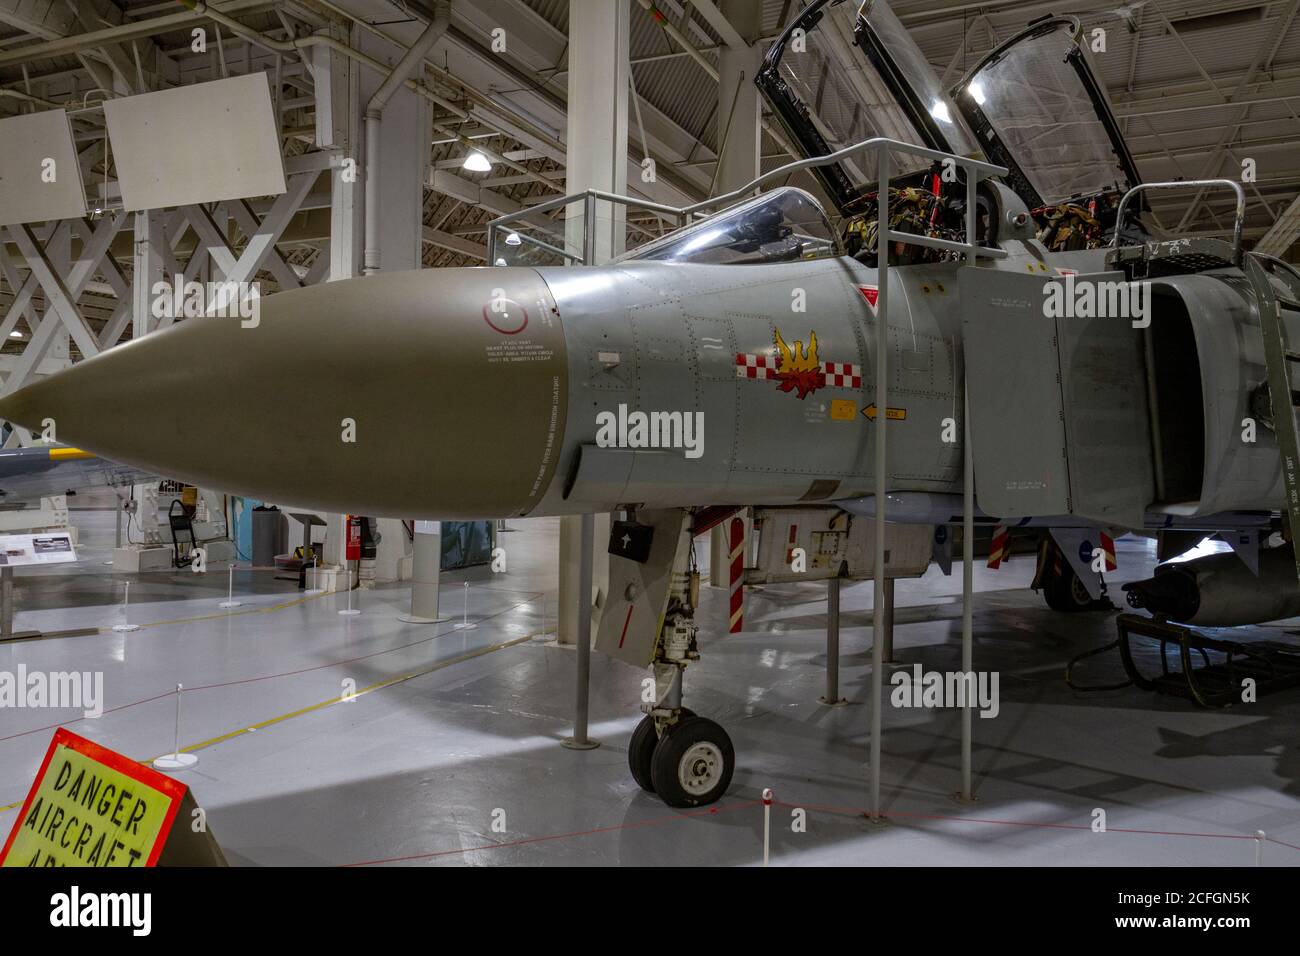 A McDonnell Douglas Phantom FGR2 all-weather fighter (1968-92) on display in the RAF Museum, London, UK. Stock Photo